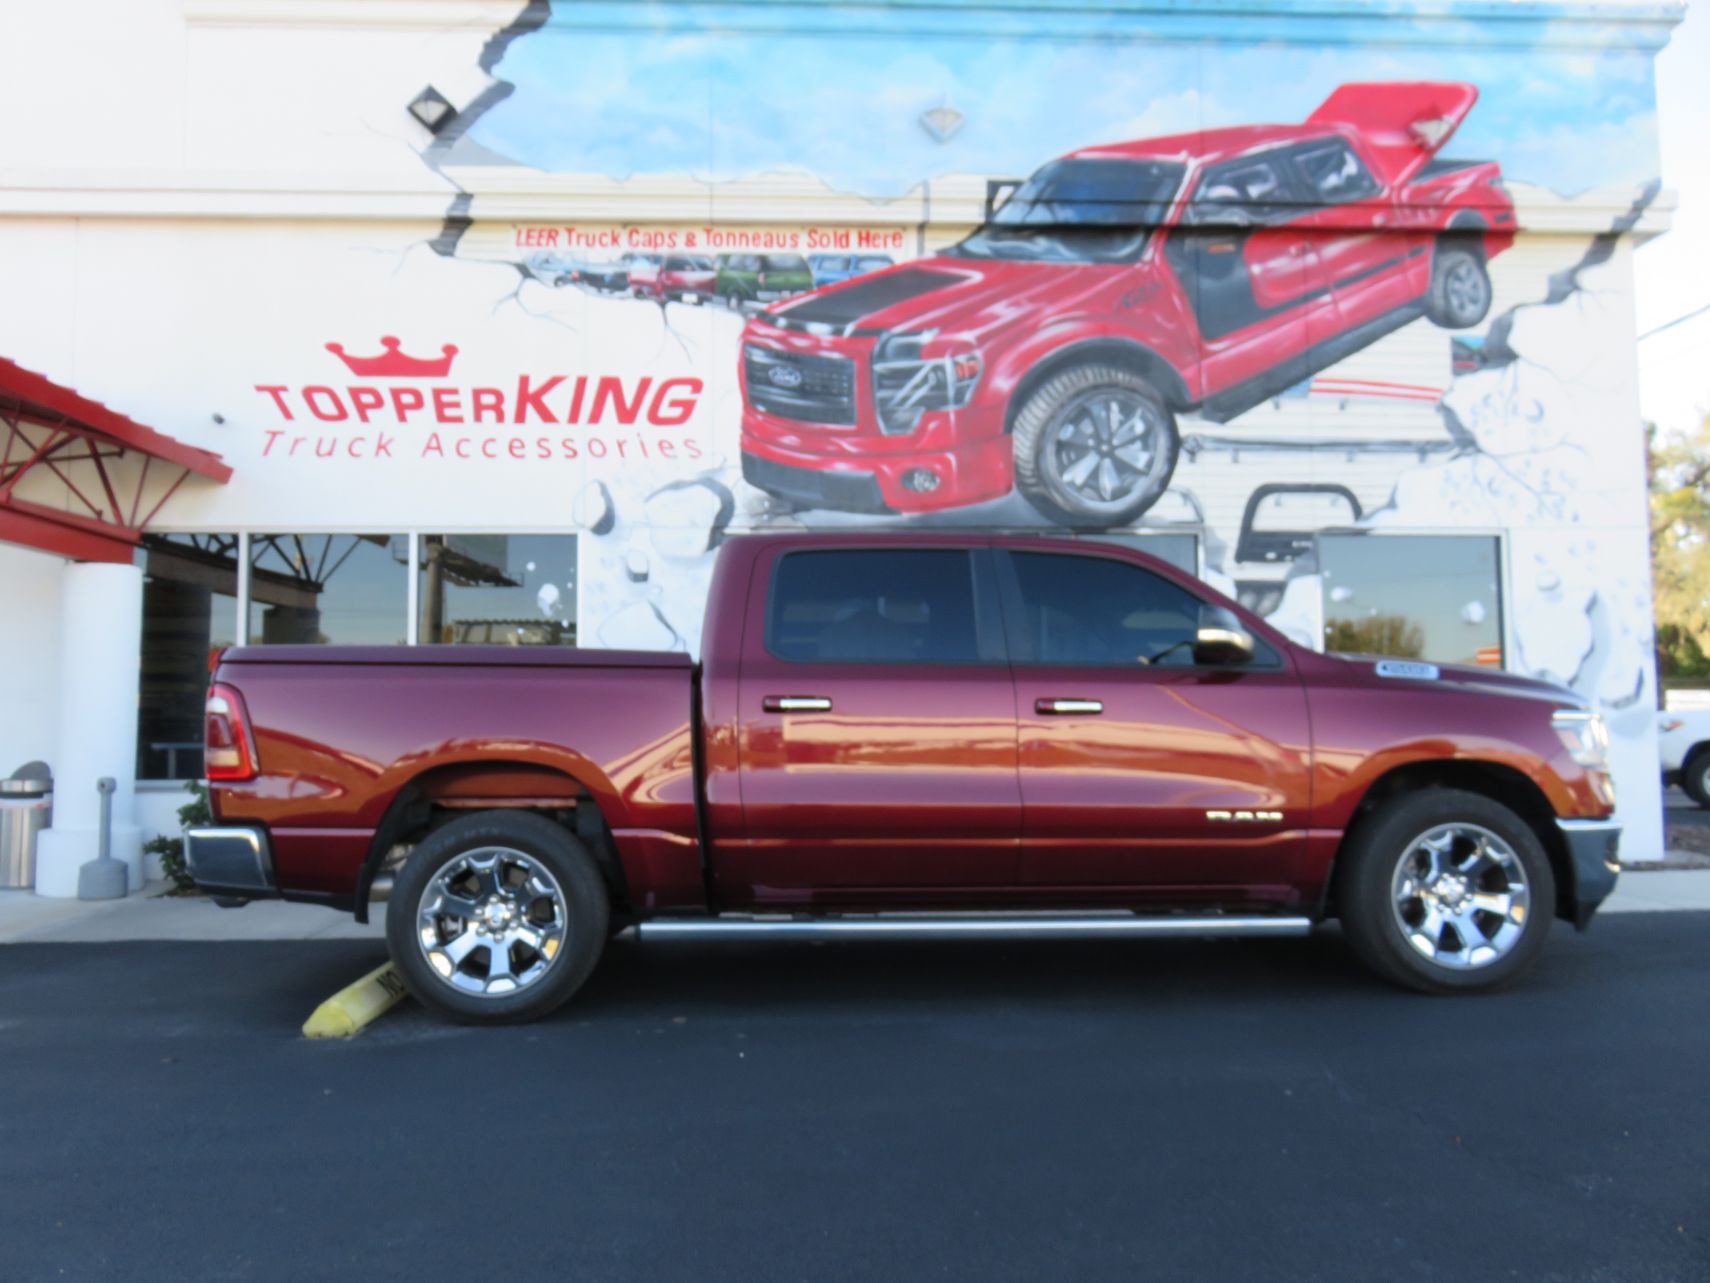 2019 Dodge RAM with LEER 550, Hitch, Running Boards, Chrome, Tint by TopperKING Brandon 813-689-2449 or Clearwater FL 727-530-9066. Call Now!